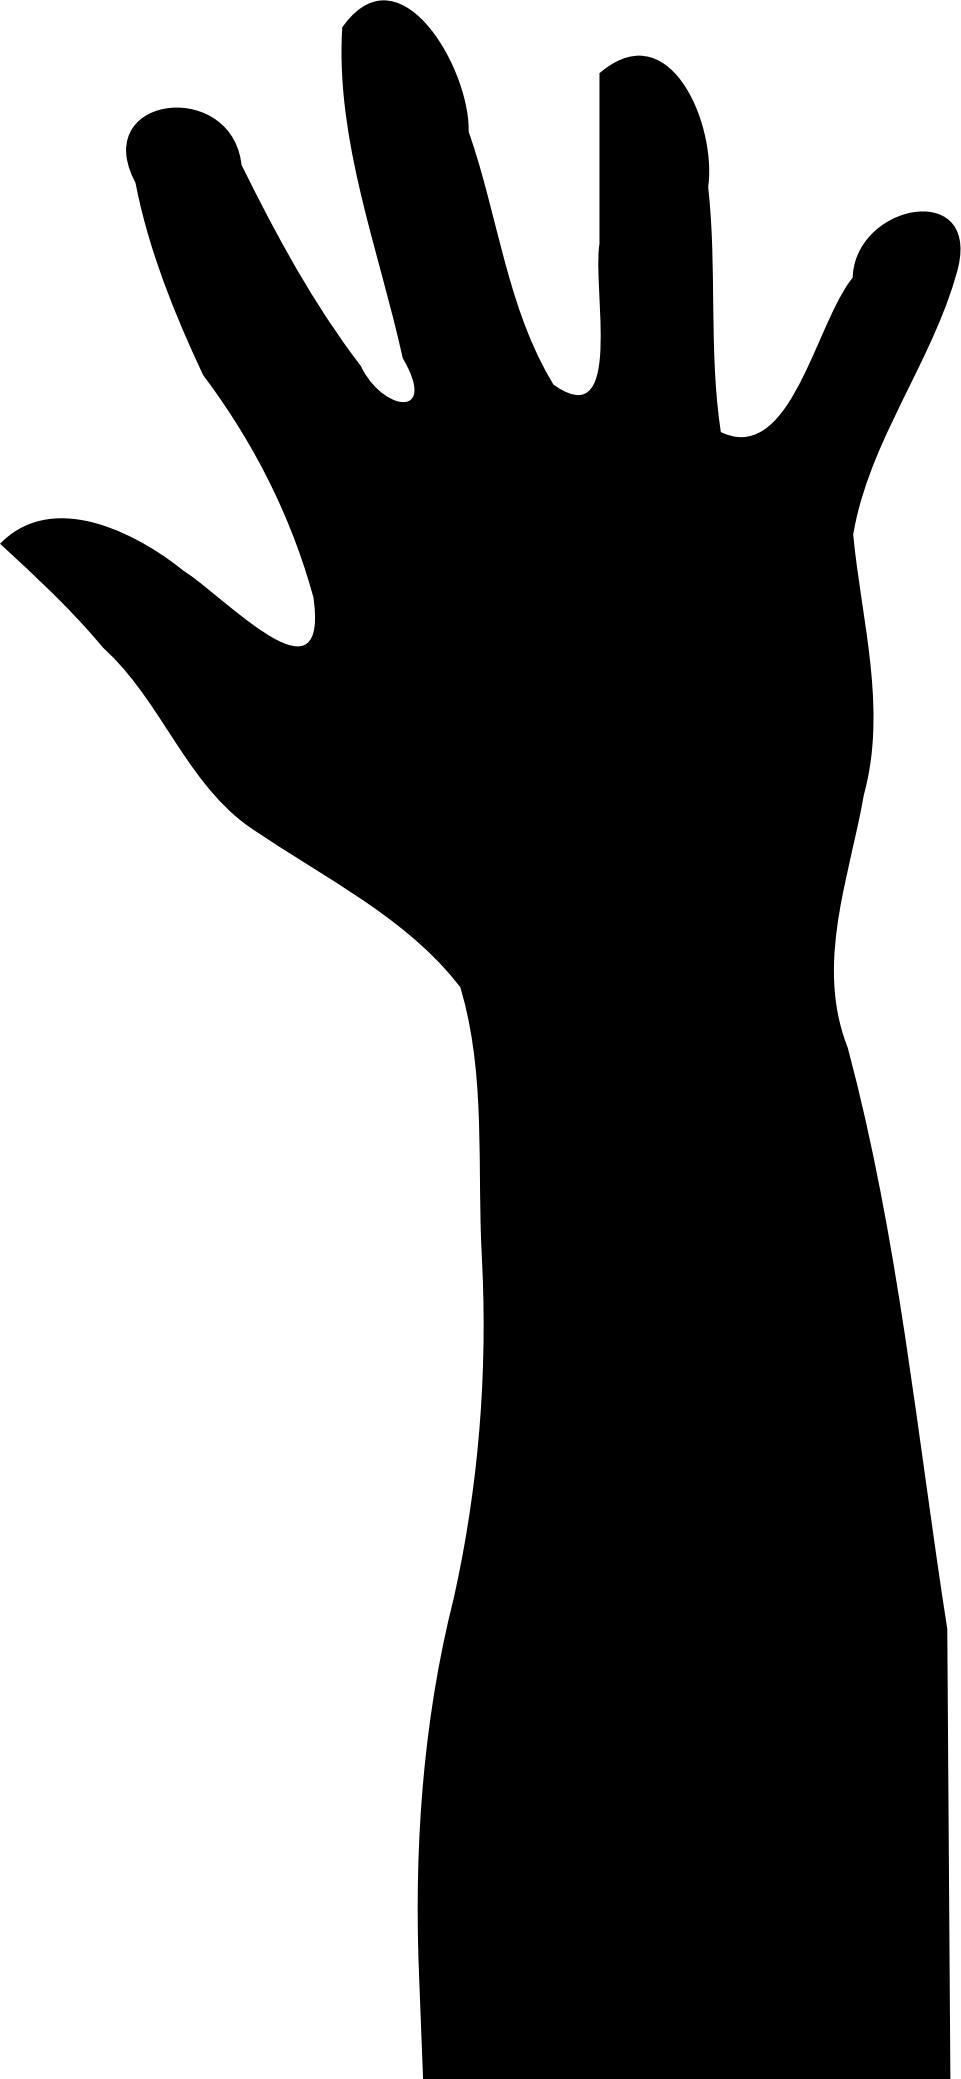 Raised Hand in Silhouette png transparent